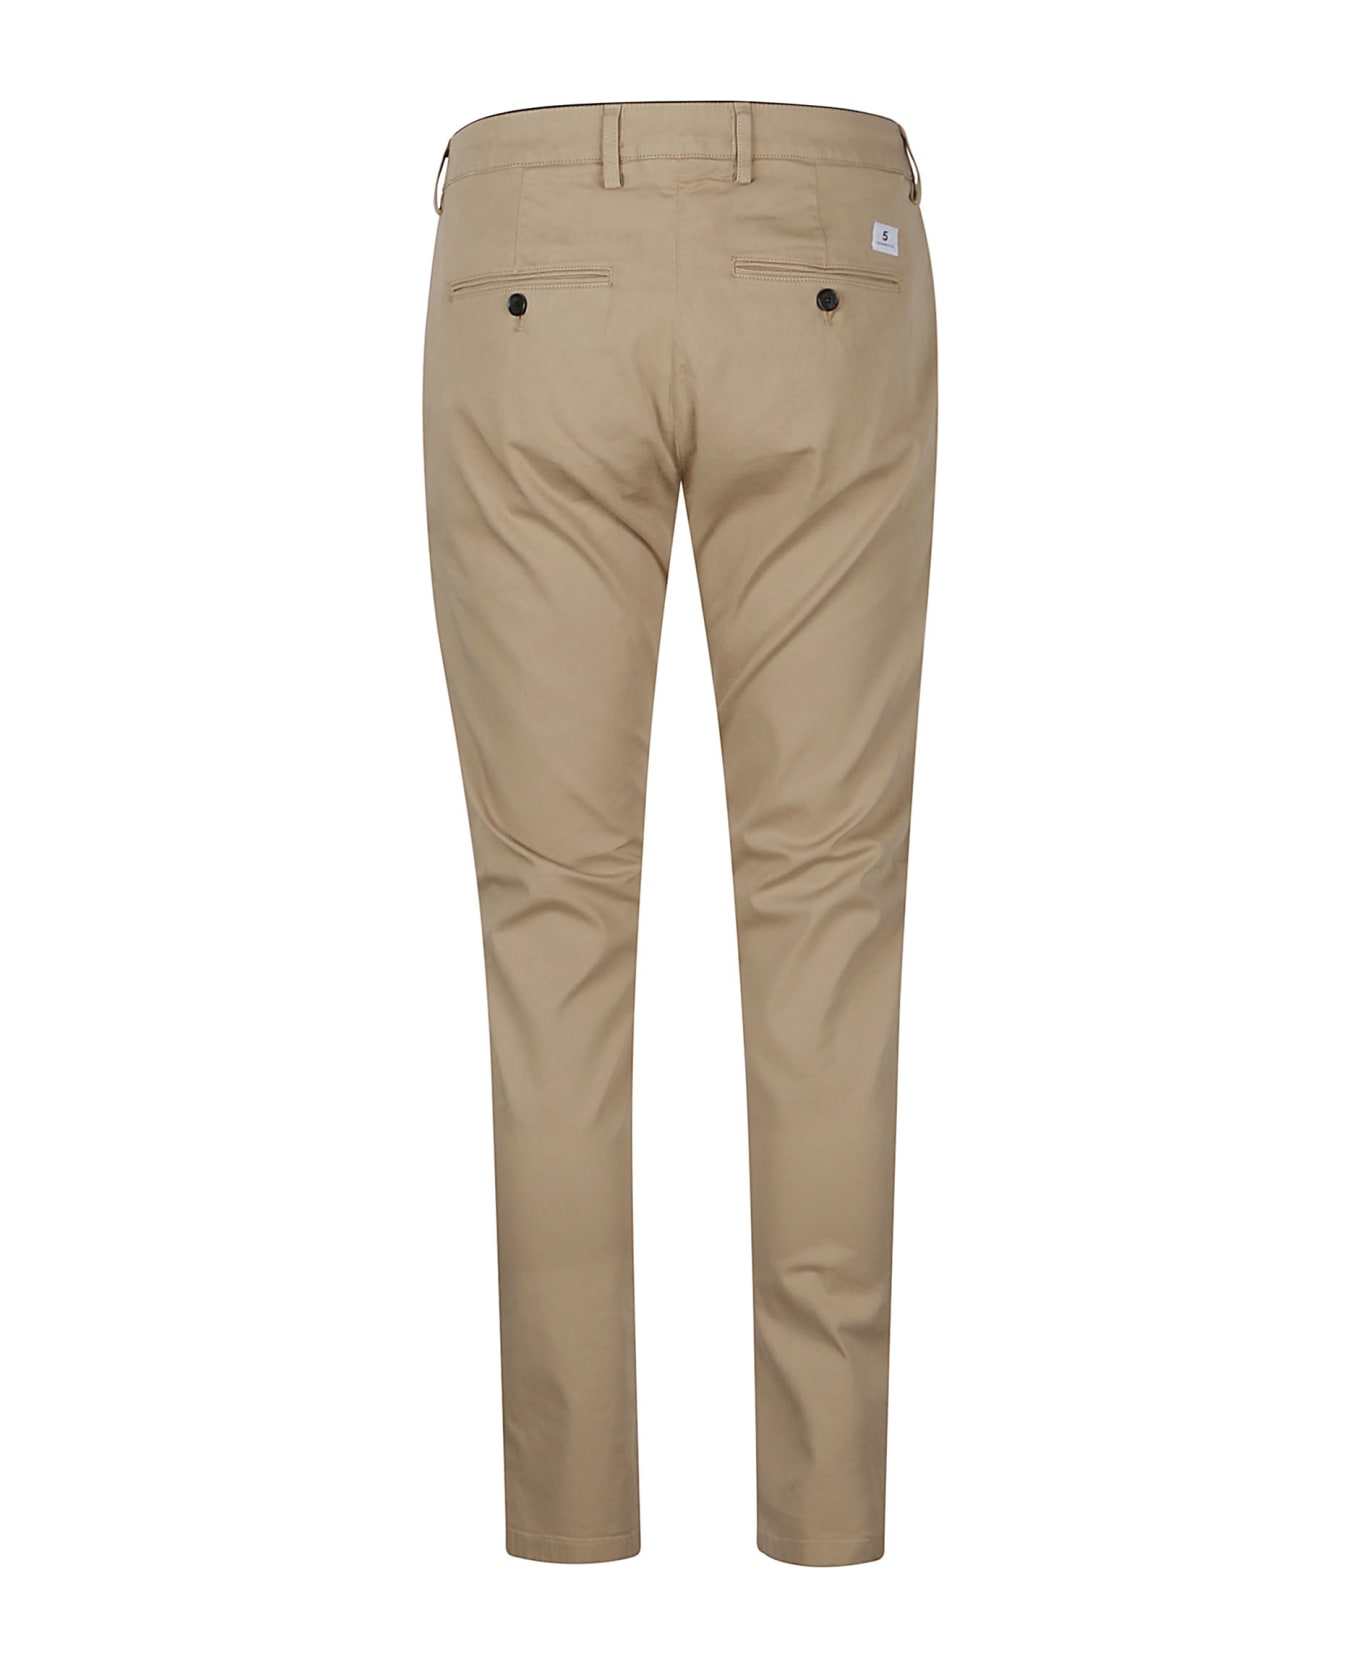 Department Five Mike Pant - Beige ボトムス